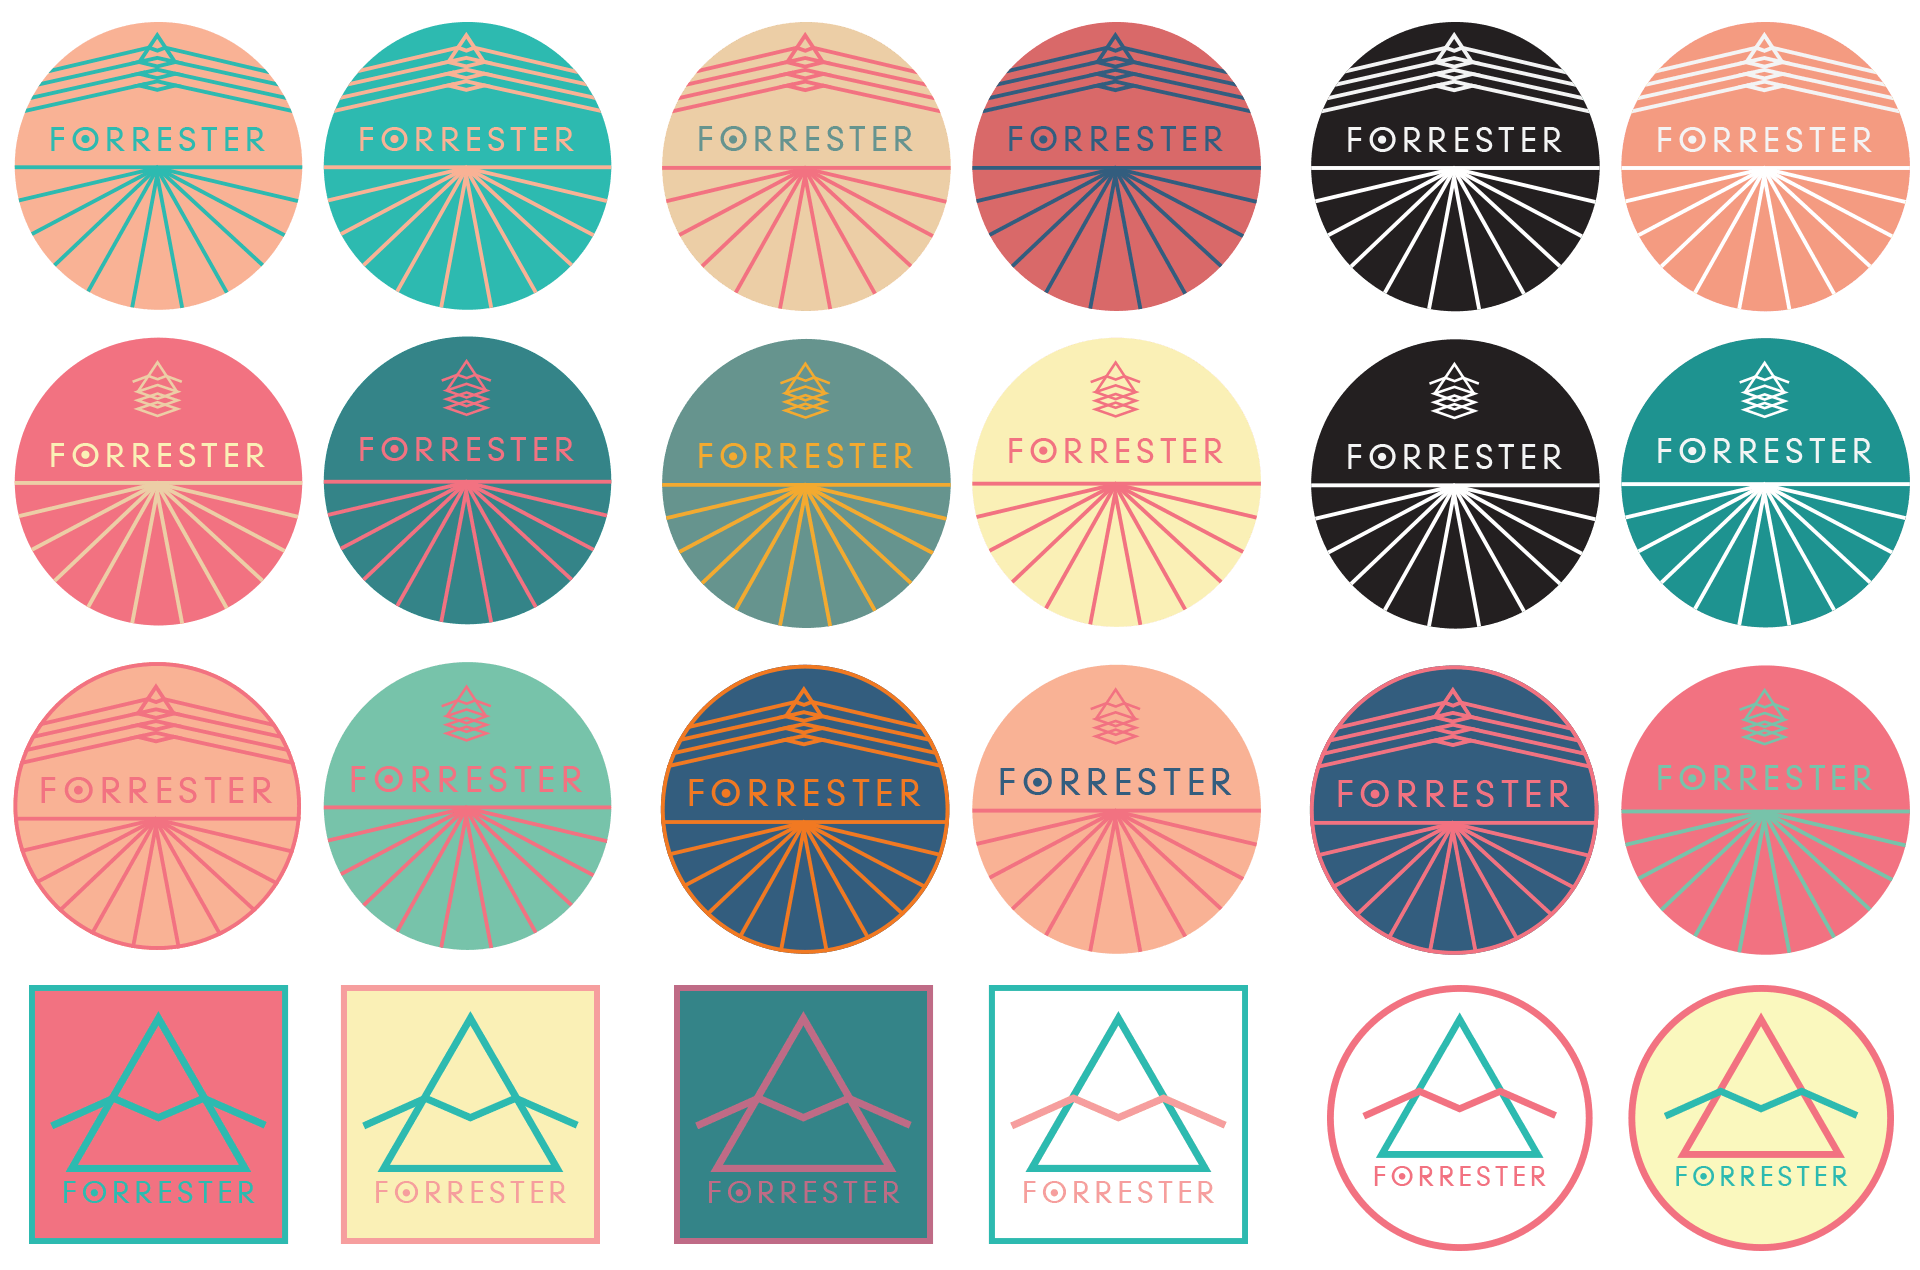 forrester-stickers